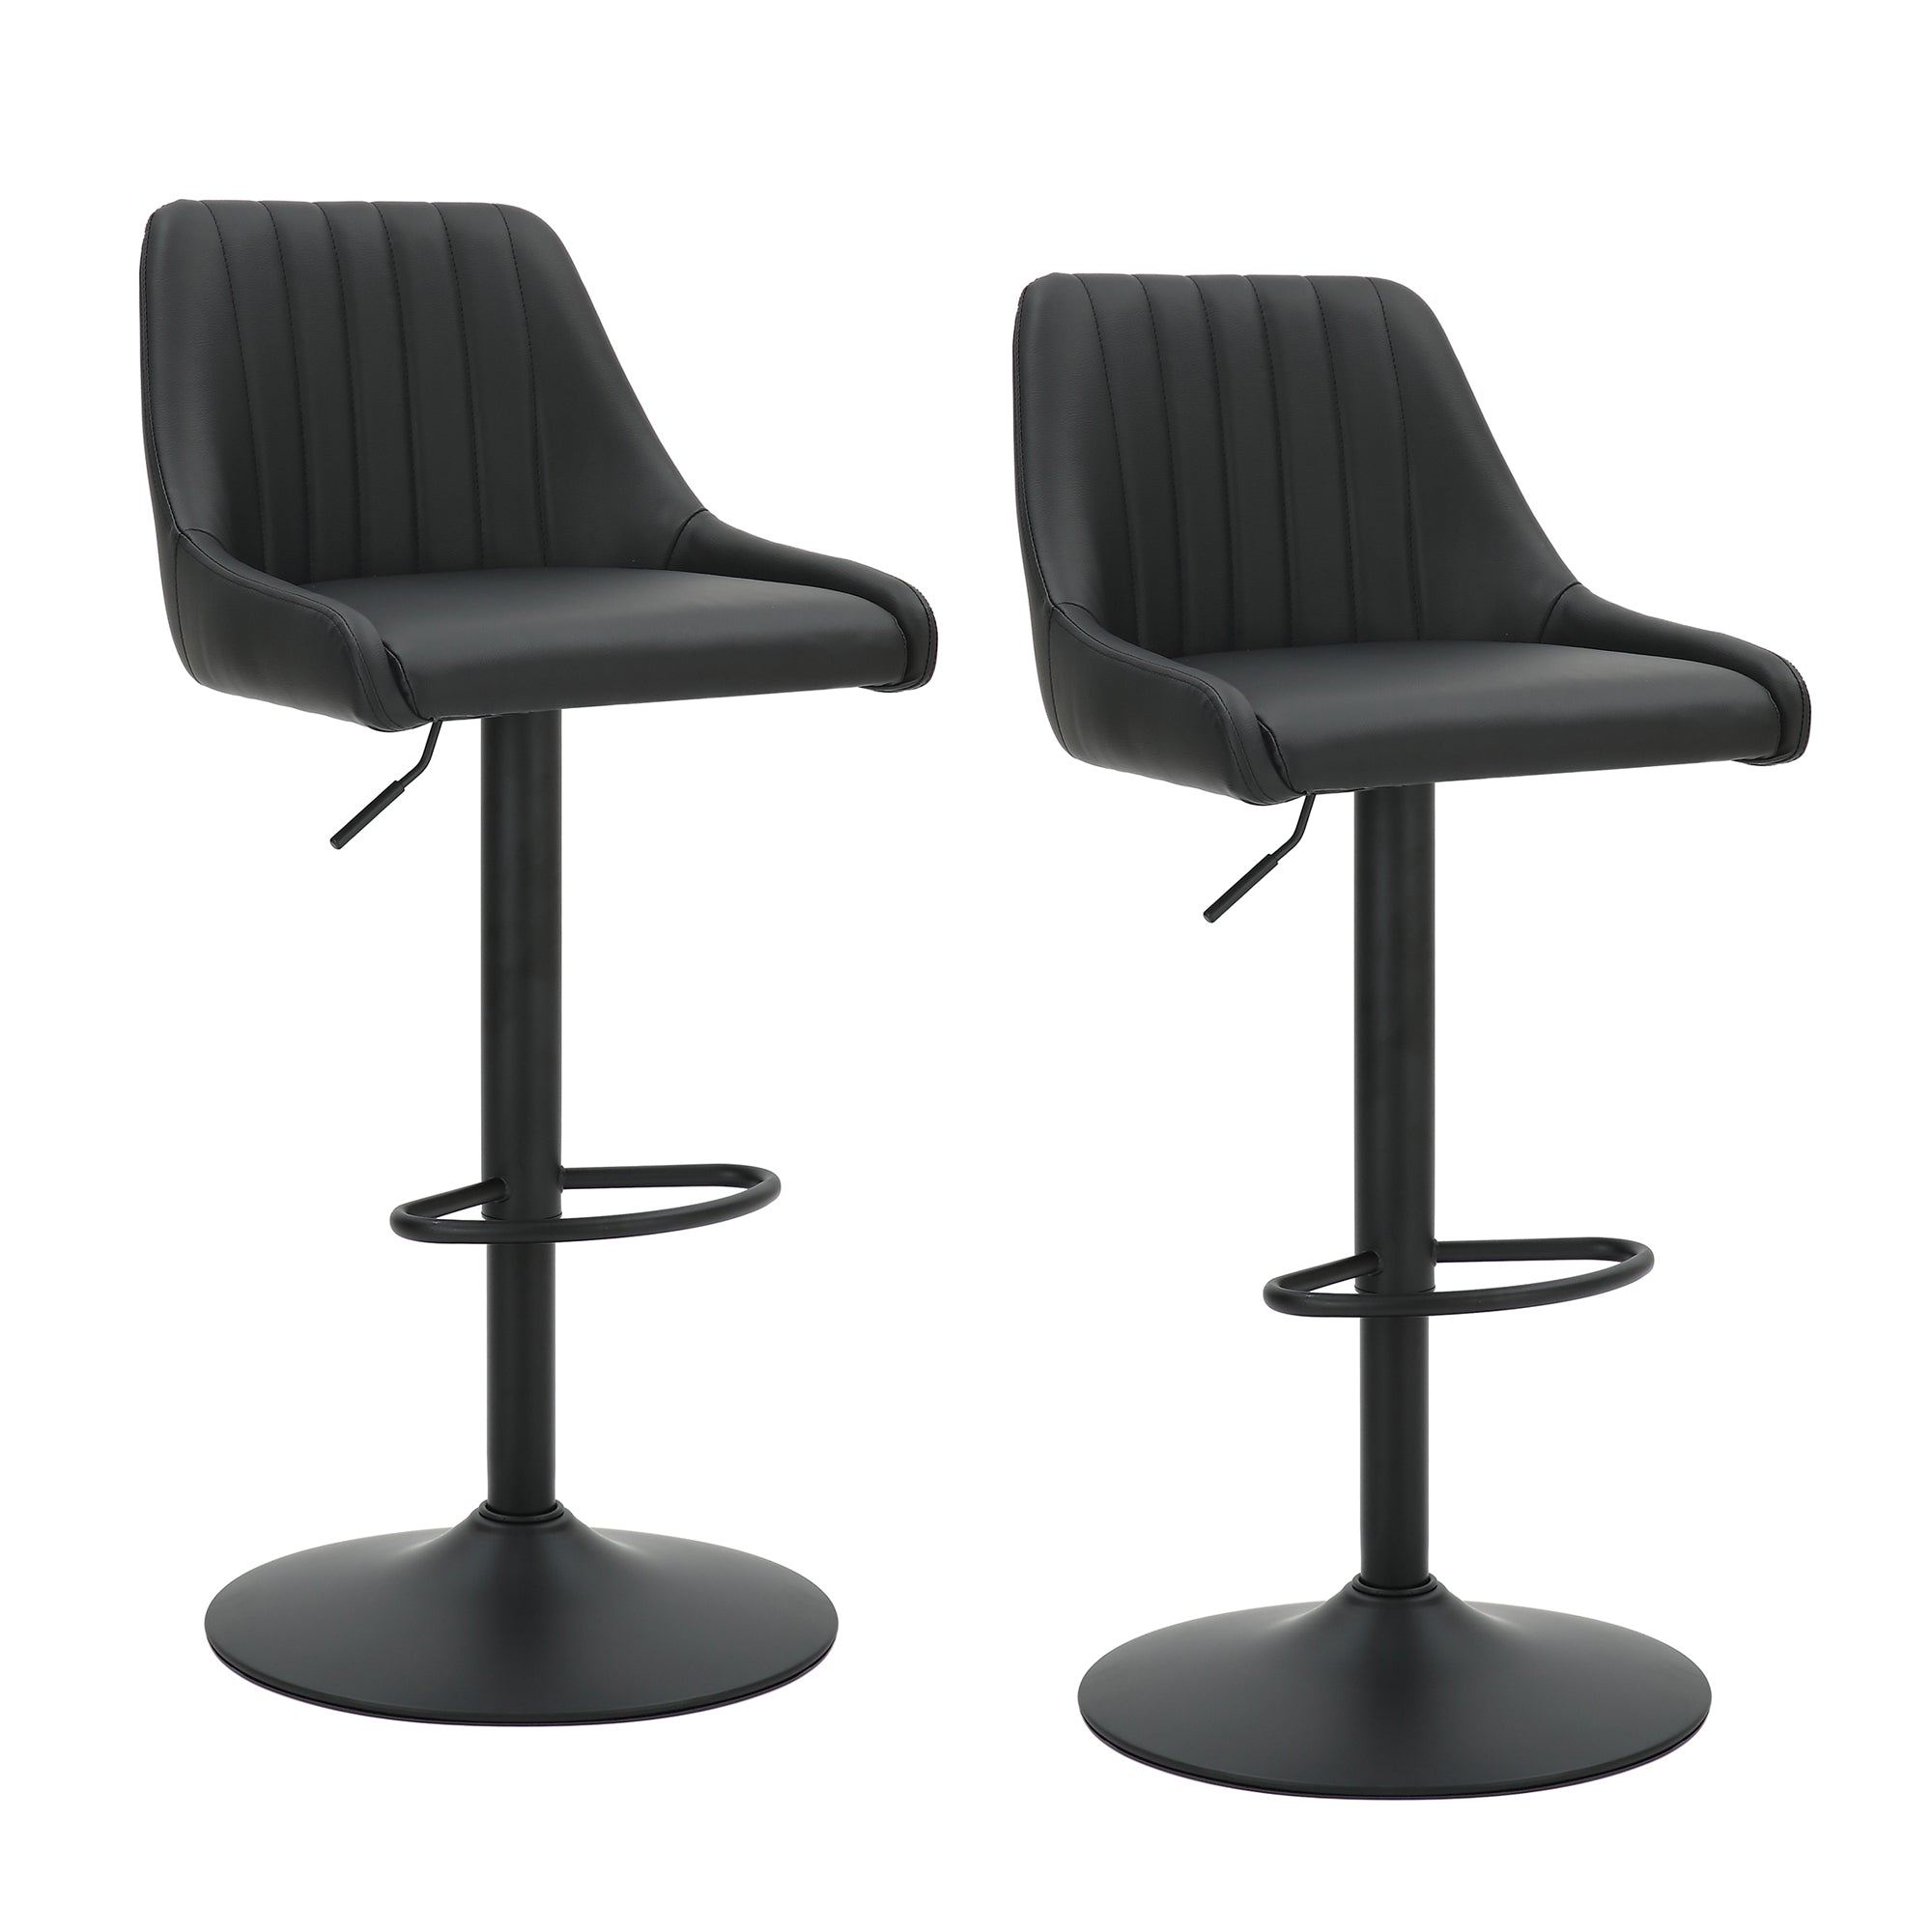 Kron Adjustable Height Air-Lift Swivel Stool, Set of 2, in Black Faux